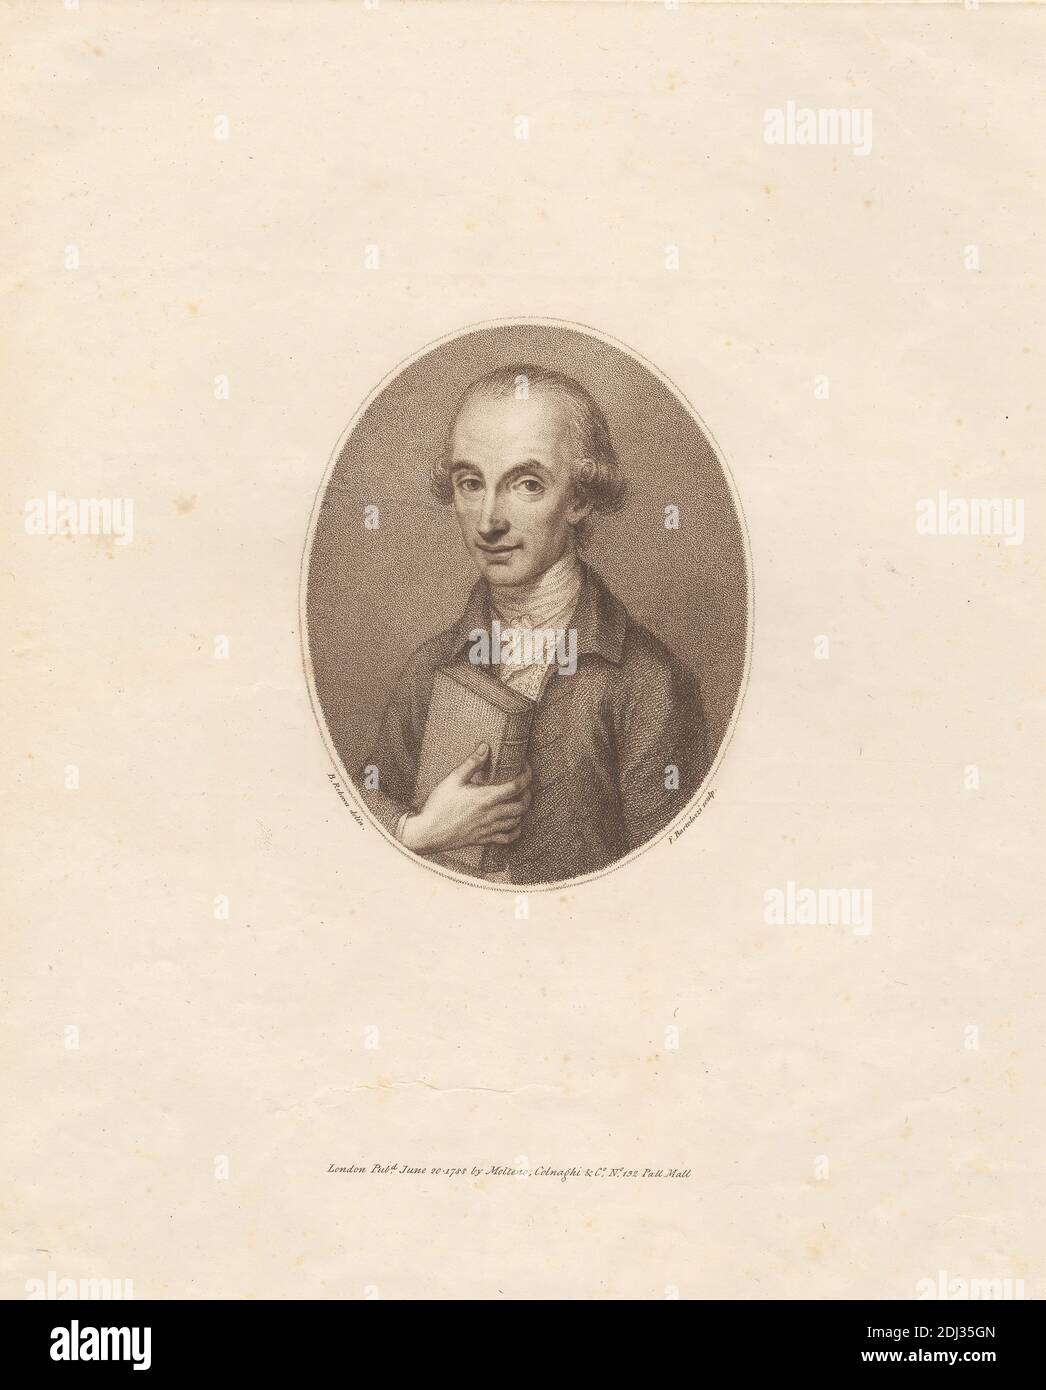 Natalis Thomas Maggi, Print made by Francesco Bartolozzi RA, 1728–1815, Italian, active in Britain (1764–99), after Biagio Rebecca, Italian, 1735–1808, Italian, Published by Molteno, Colnaghi & Co., established 1760, active ca. 1785–1911, Italian, active in Britain, Published by Anthony Molteno, 1784–1845, British, 1788, Stipple engraving and etching on medium, moderately textured, cream laid paper, Sheet: 13 x 10 3/8 inches (33 x 26.4 cm), Plate: 10 7/8 x 8 7/8 inches (27.6 x 22.6 cm), and Image: 4 3/4 x 3 3/4 inches (12 x 9.5 cm), book, coat, costume, cravat, man, musician, oval, portrait Stock Photo